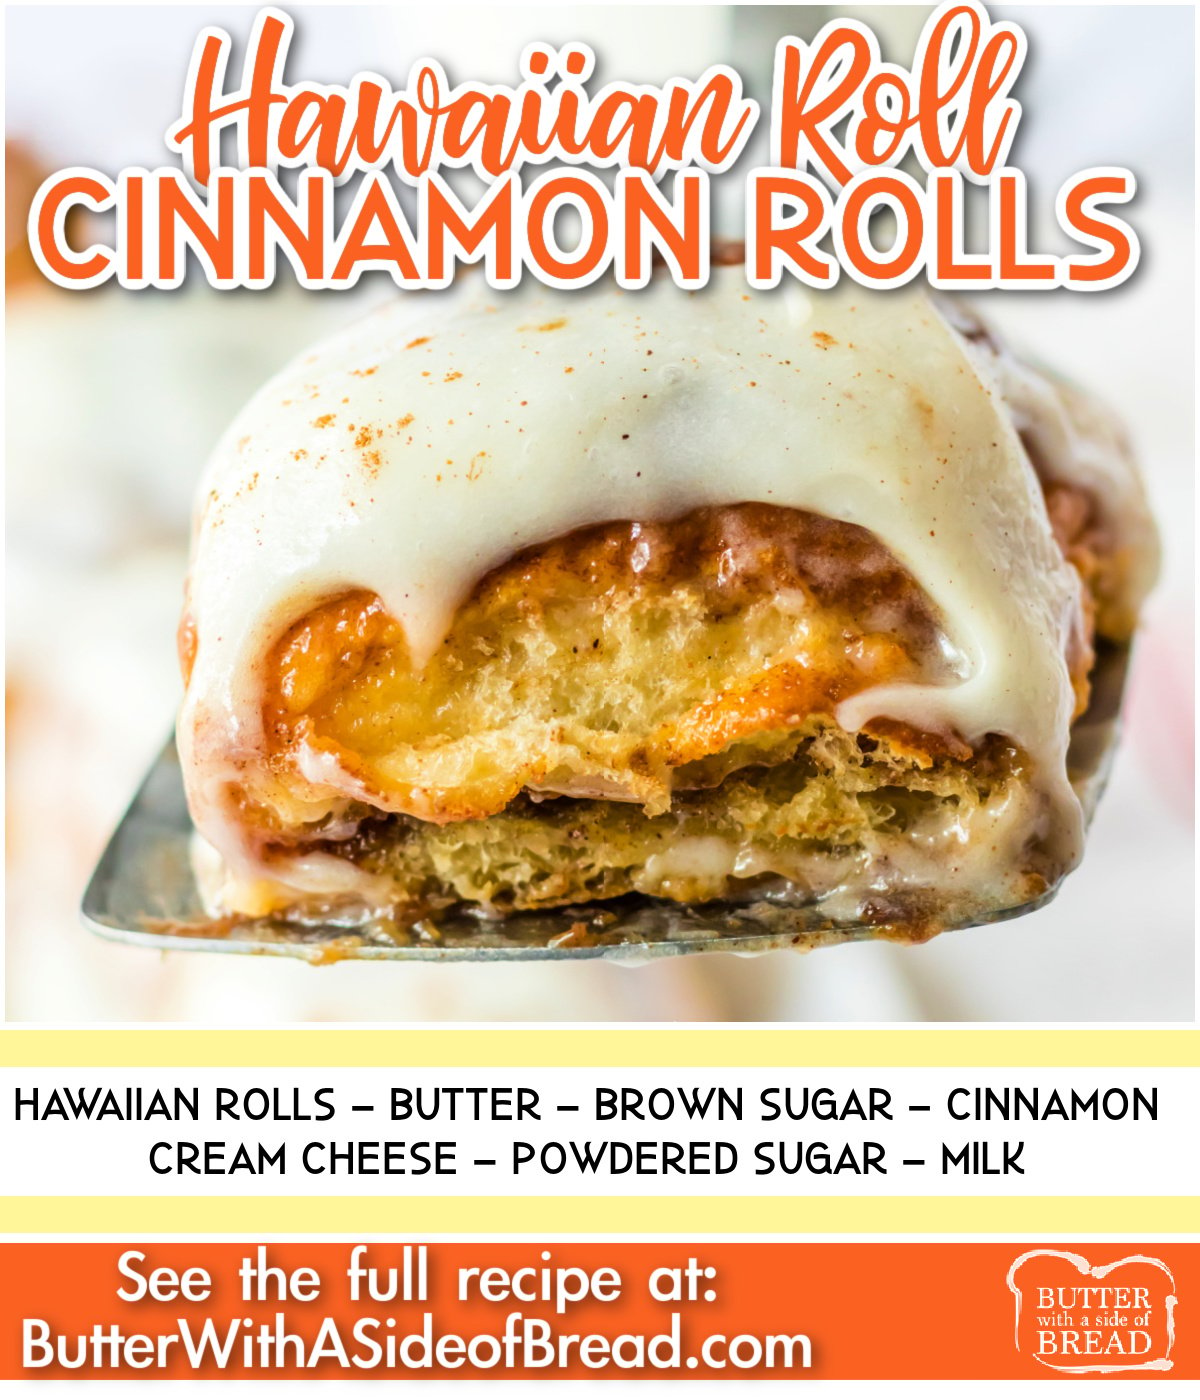 Hawaiian Roll Cinnamon Rolls are the easiest cinnamon rolls to make and they are absolutely delicious. Made with pre-made Hawaiian rolls, these cinnamon rolls can be ready to eat in less than 30 minutes!